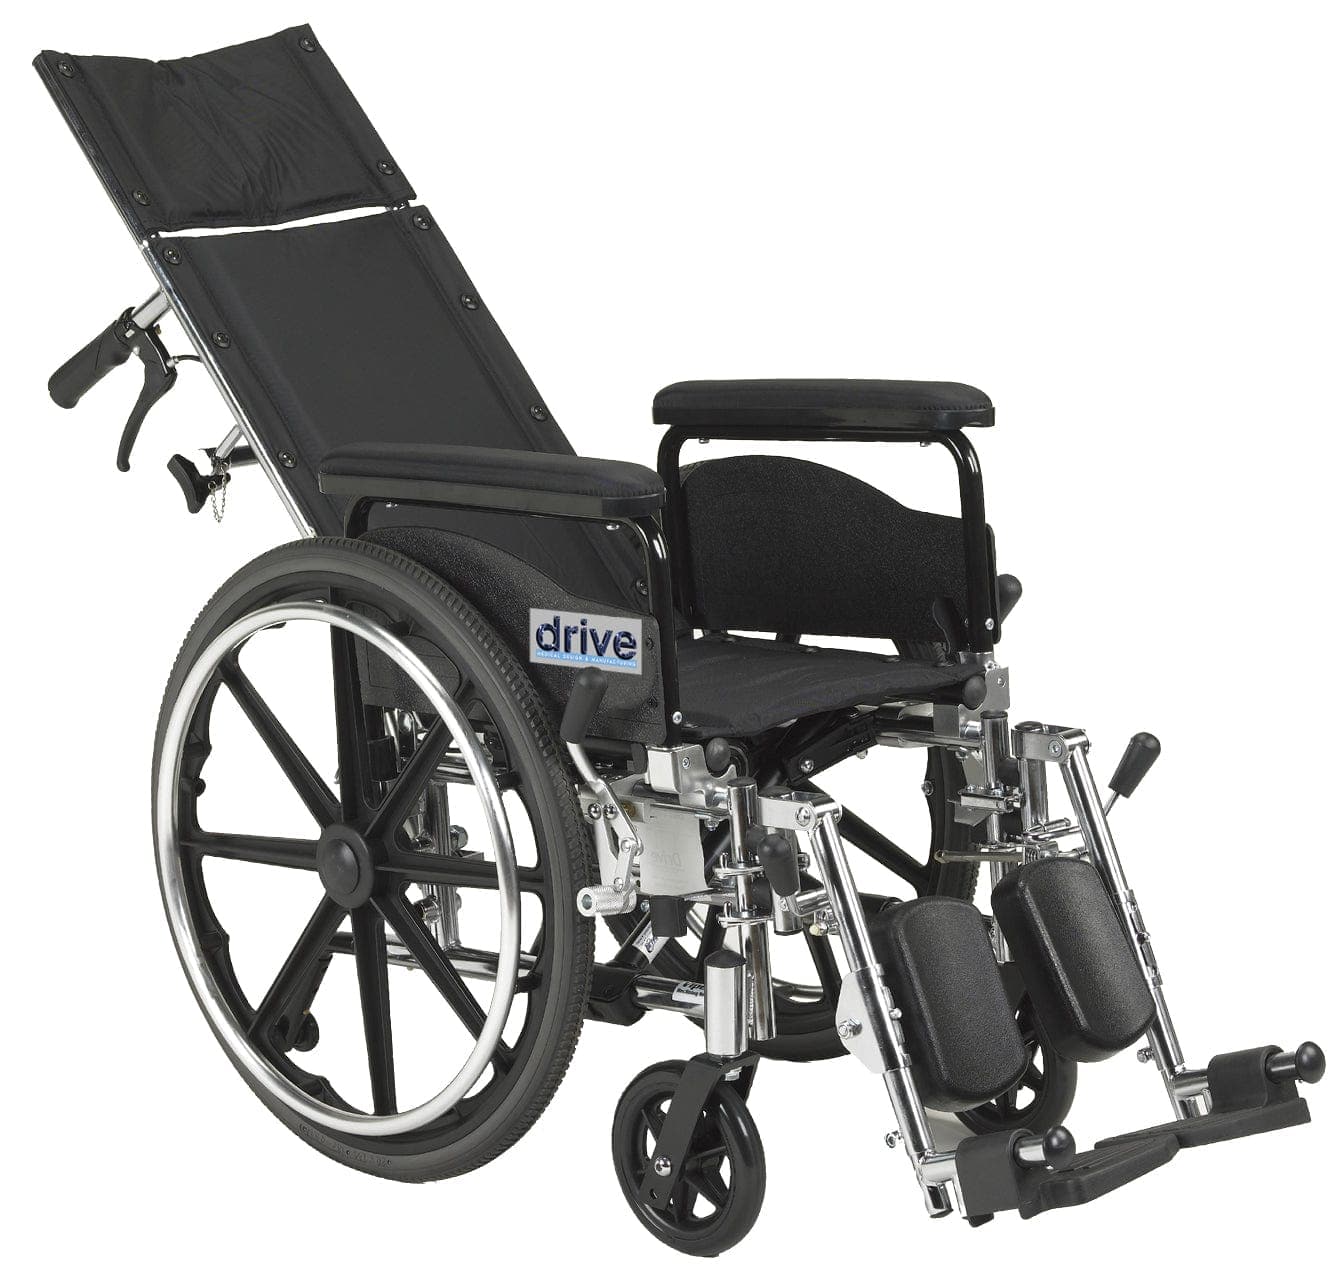 Drive Medical Wheelchairs Full Arms / 18" Seat Drive Medical Viper Plus GT Full Reclining Wheelchair